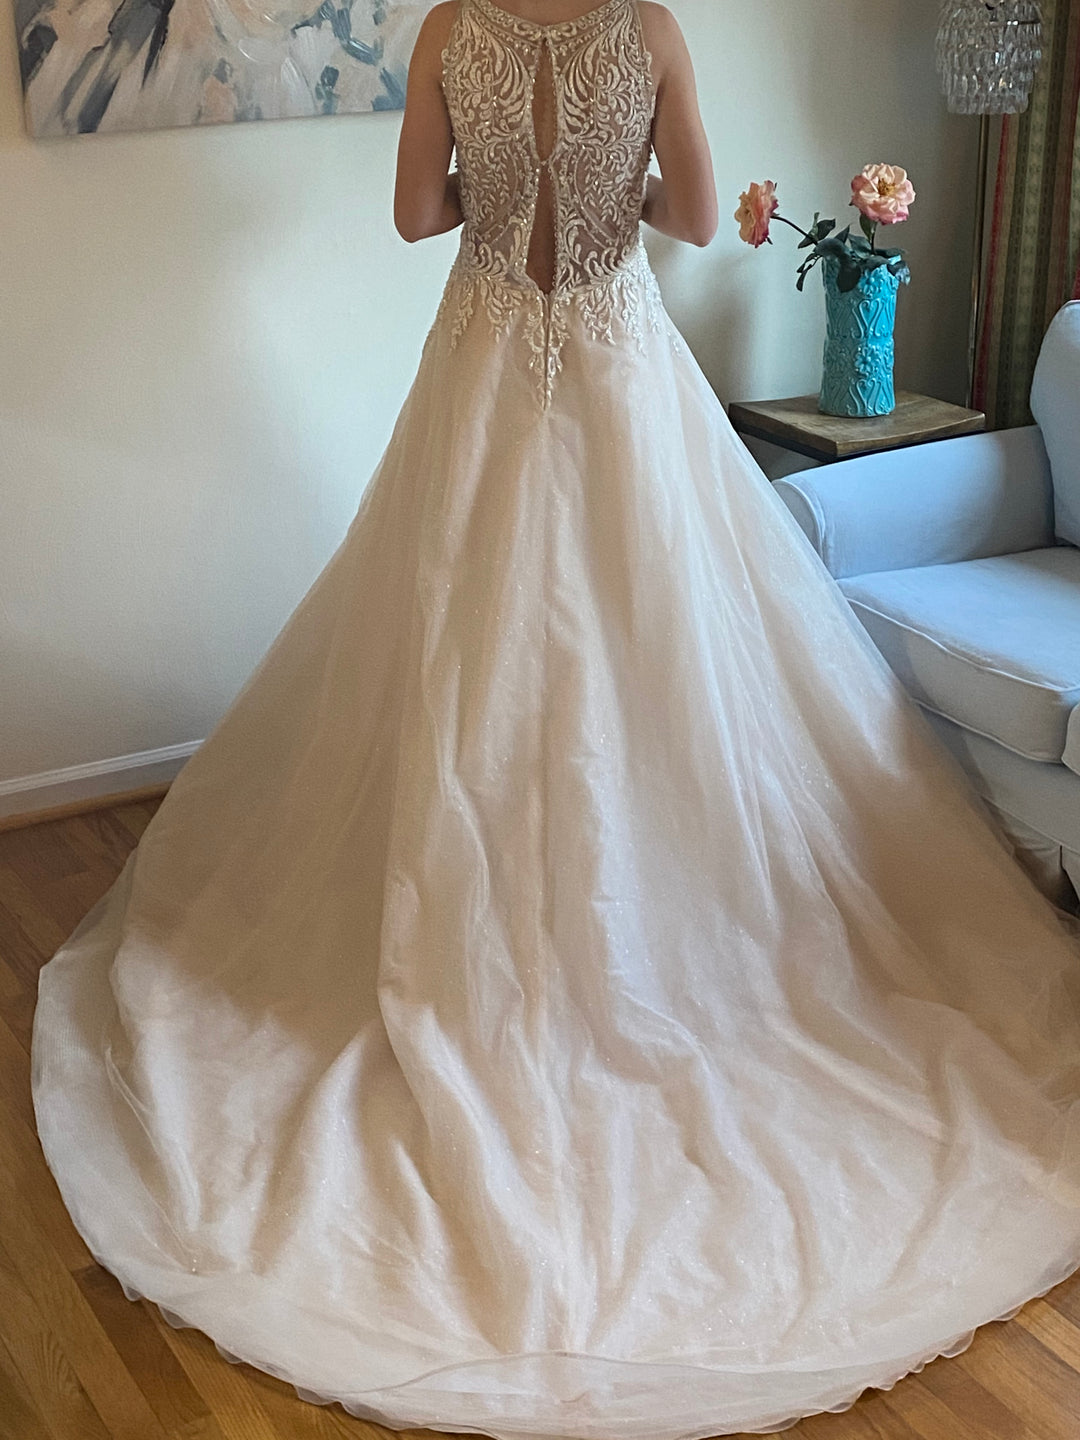 Maggie Sottero Bridal Gown Style "Pernille" Size 14